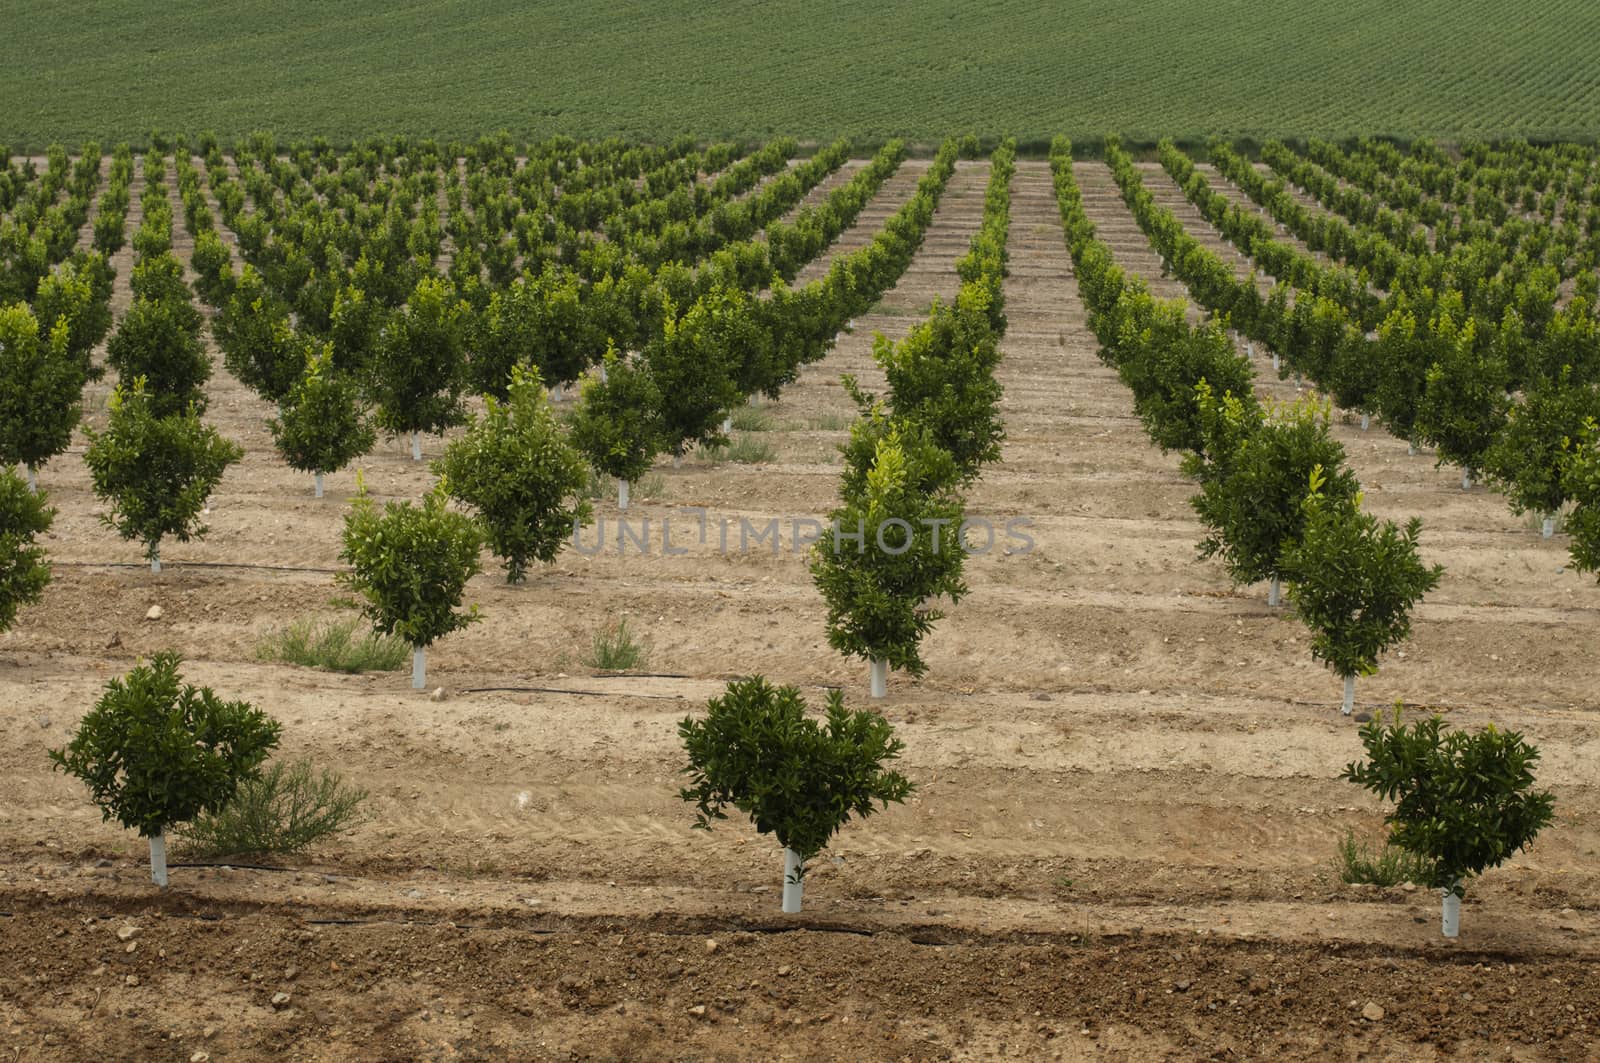 Young orange trees planted in rows